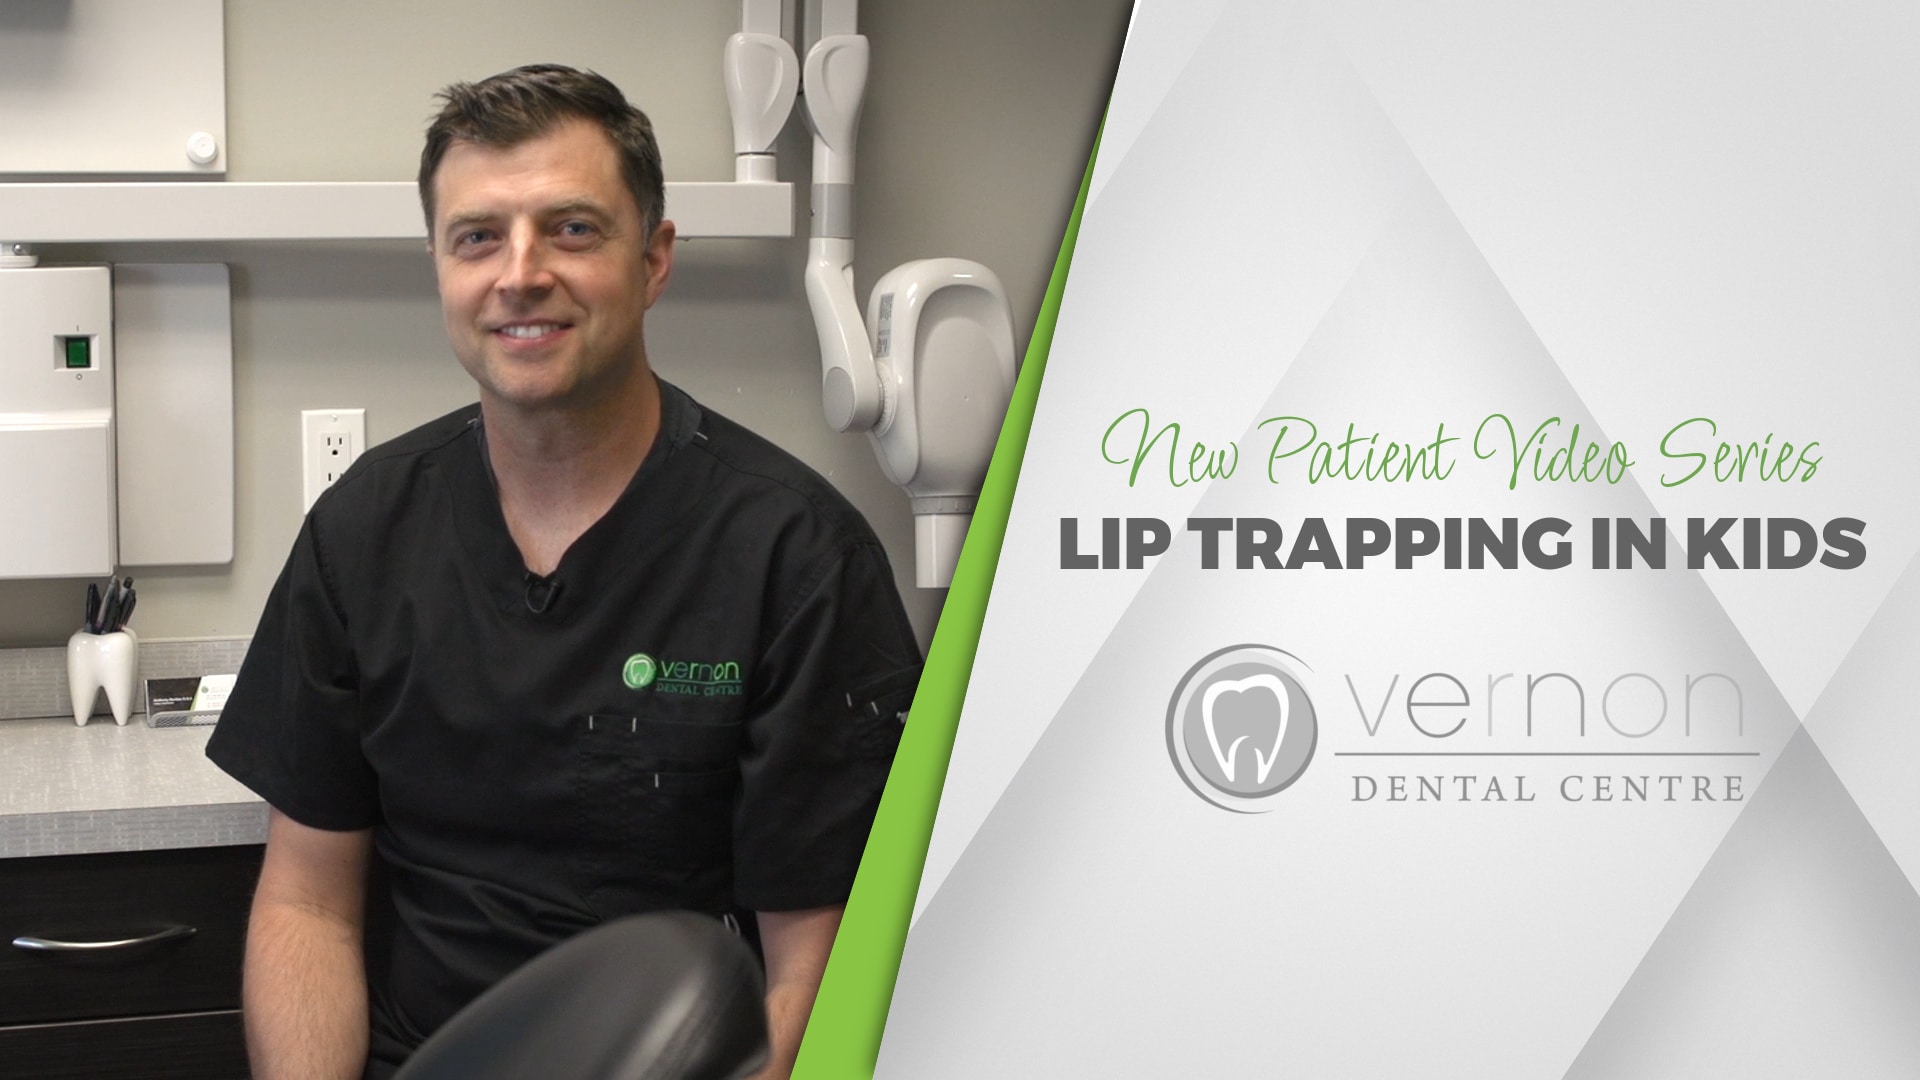 Dr. Anthony Berdan from Vernon Dental Centre discusses lip trapping in kids